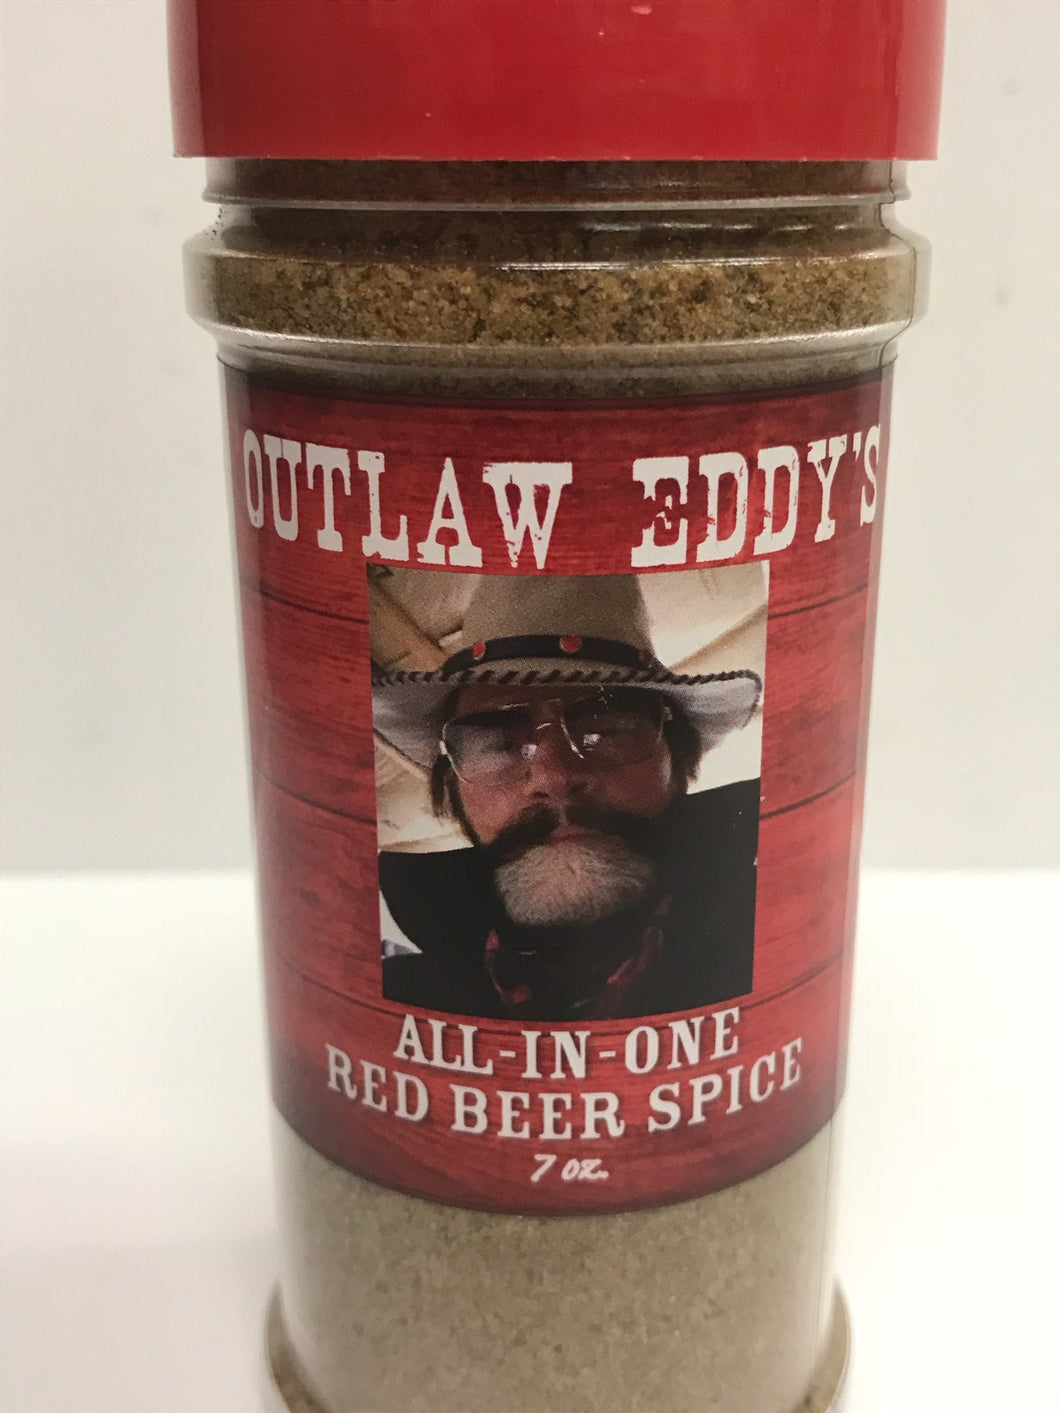 Outlaw Eddy's All-In-One Red Beer Spice